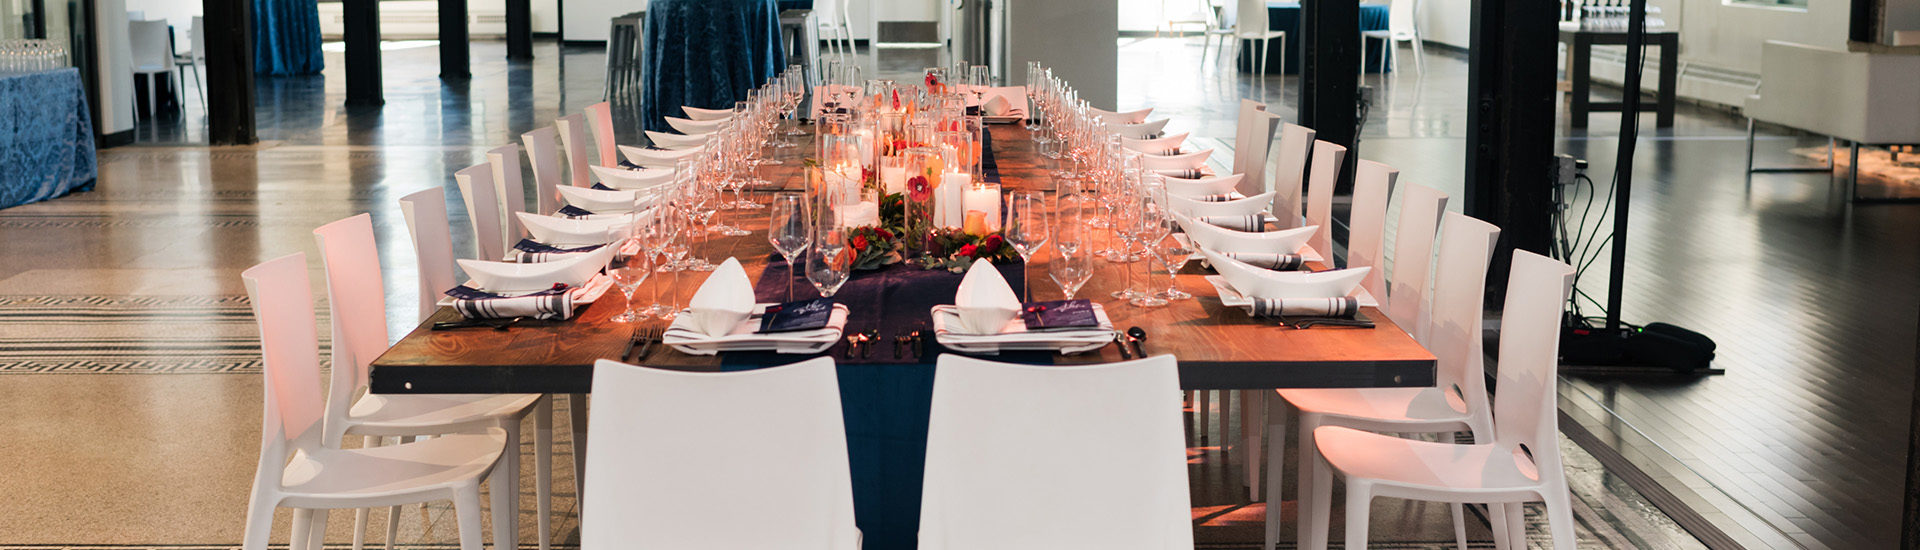 Close up of a long wooden table with modern white plastic chairs. At seating are a white glass, champagne class, and water glass, a rectangle plate with a blue and white striped napkin, oval white bowl, and navy menu. In the middle is a solid navy runner with paper flowers, and thick white candles are different heights.